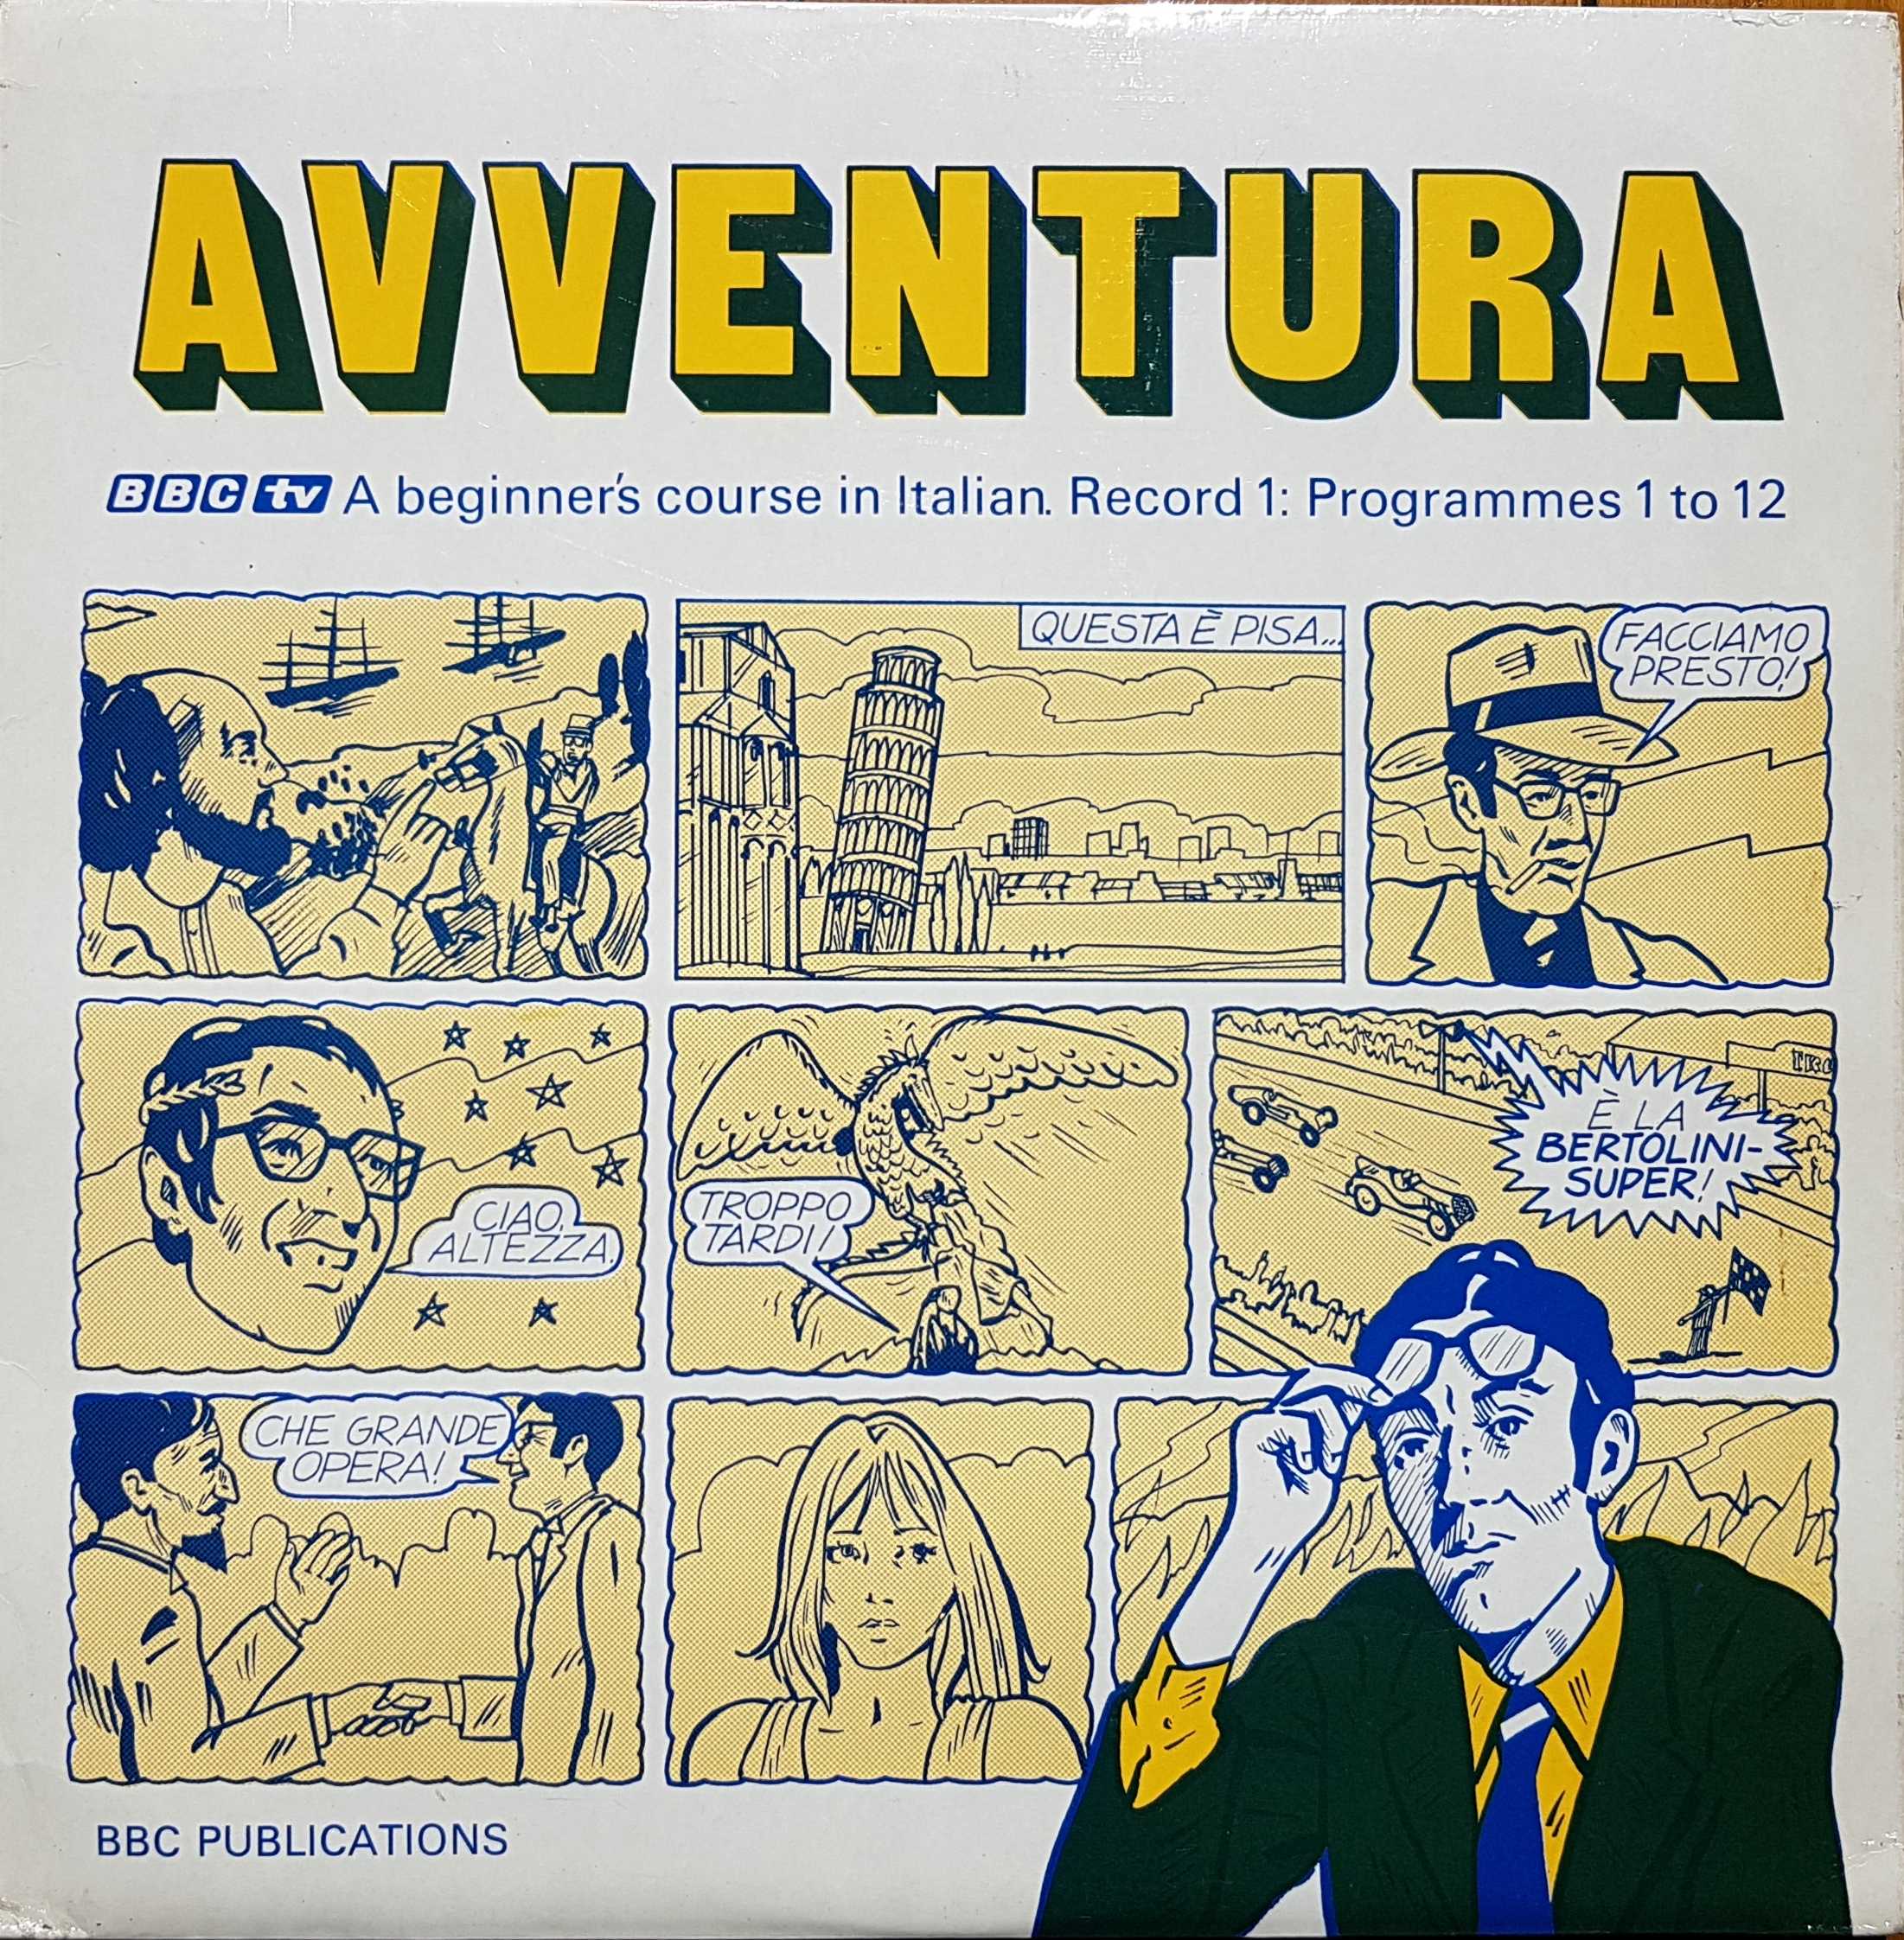 Picture of OP 177/178 Avventura - A beginner's course in Italian - Record 1 - Programmes 1 - 12 by artist Alfio Bernabei / Romolo Bruni from the BBC albums - Records and Tapes library